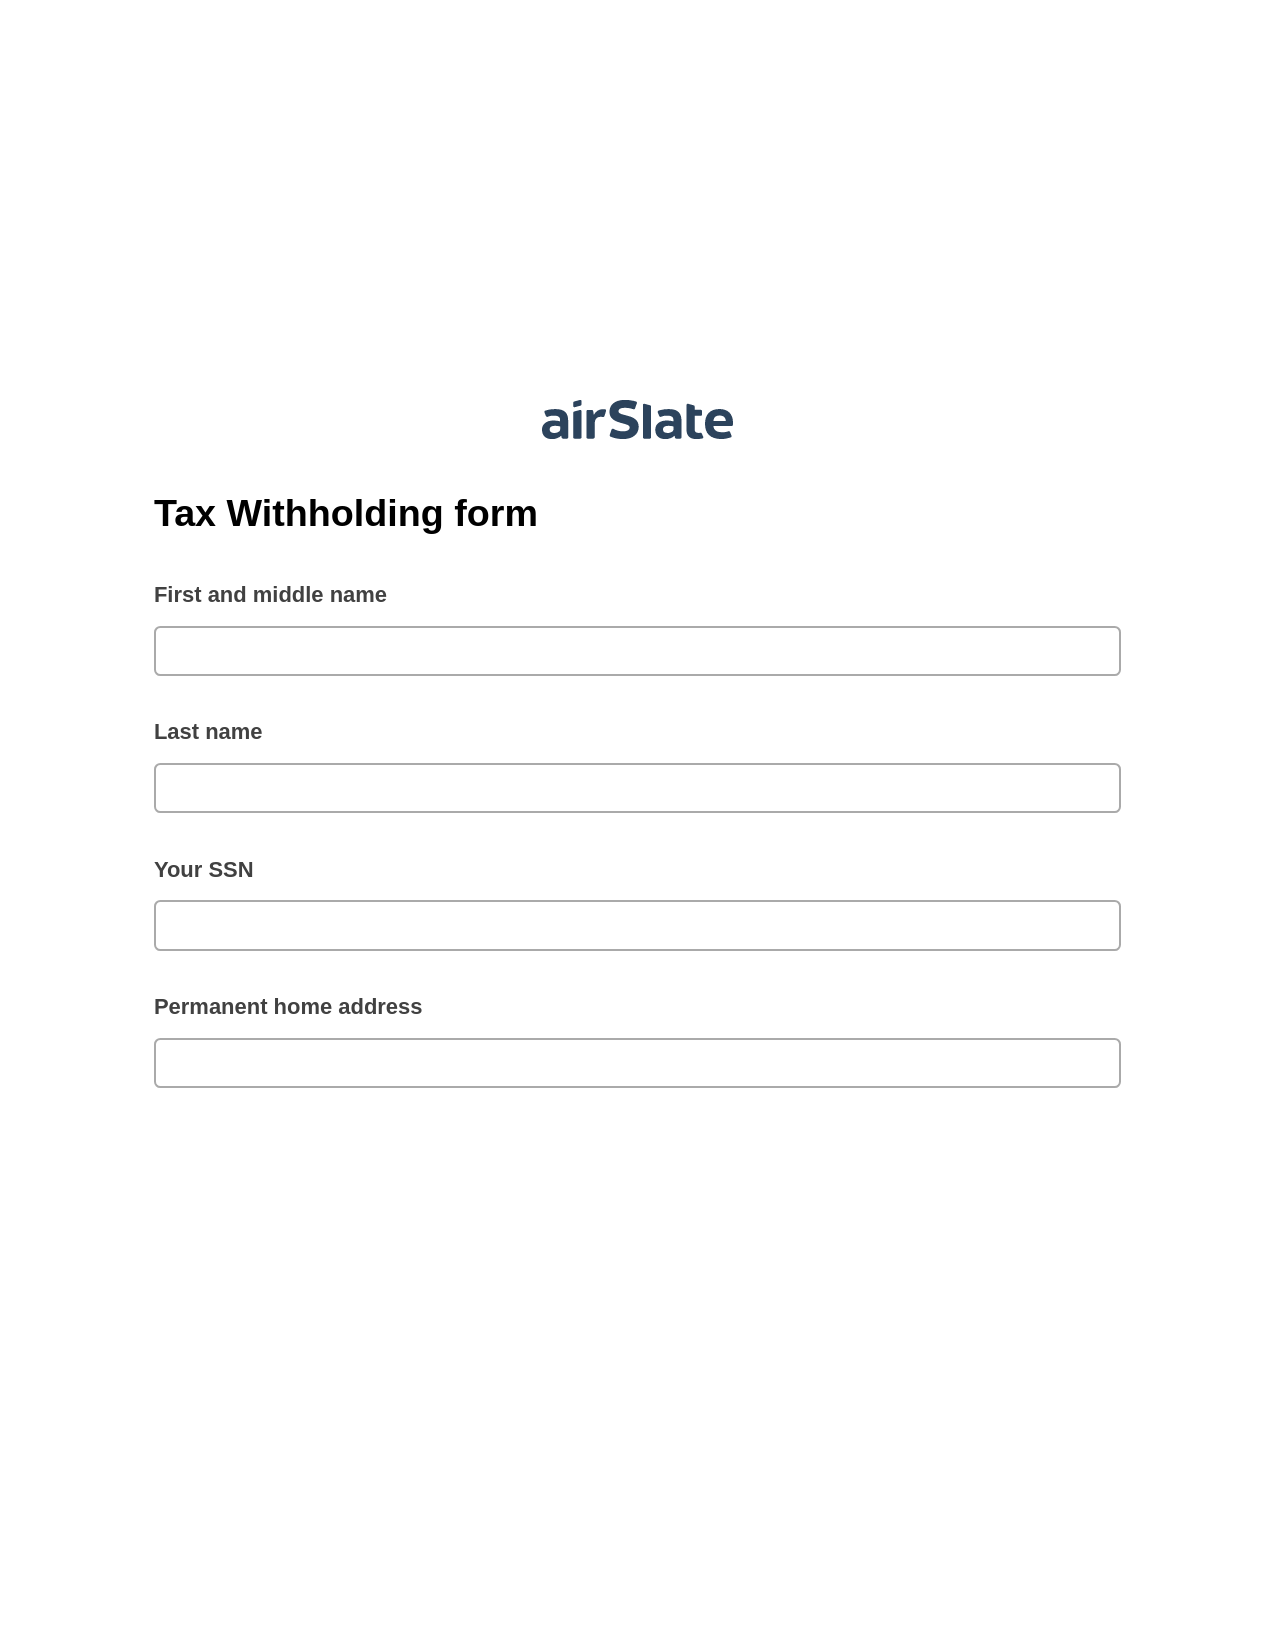 Multirole Tax Withholding form Pre-fill Document Bot, Audit Trail Bot, Export to NetSuite Bot